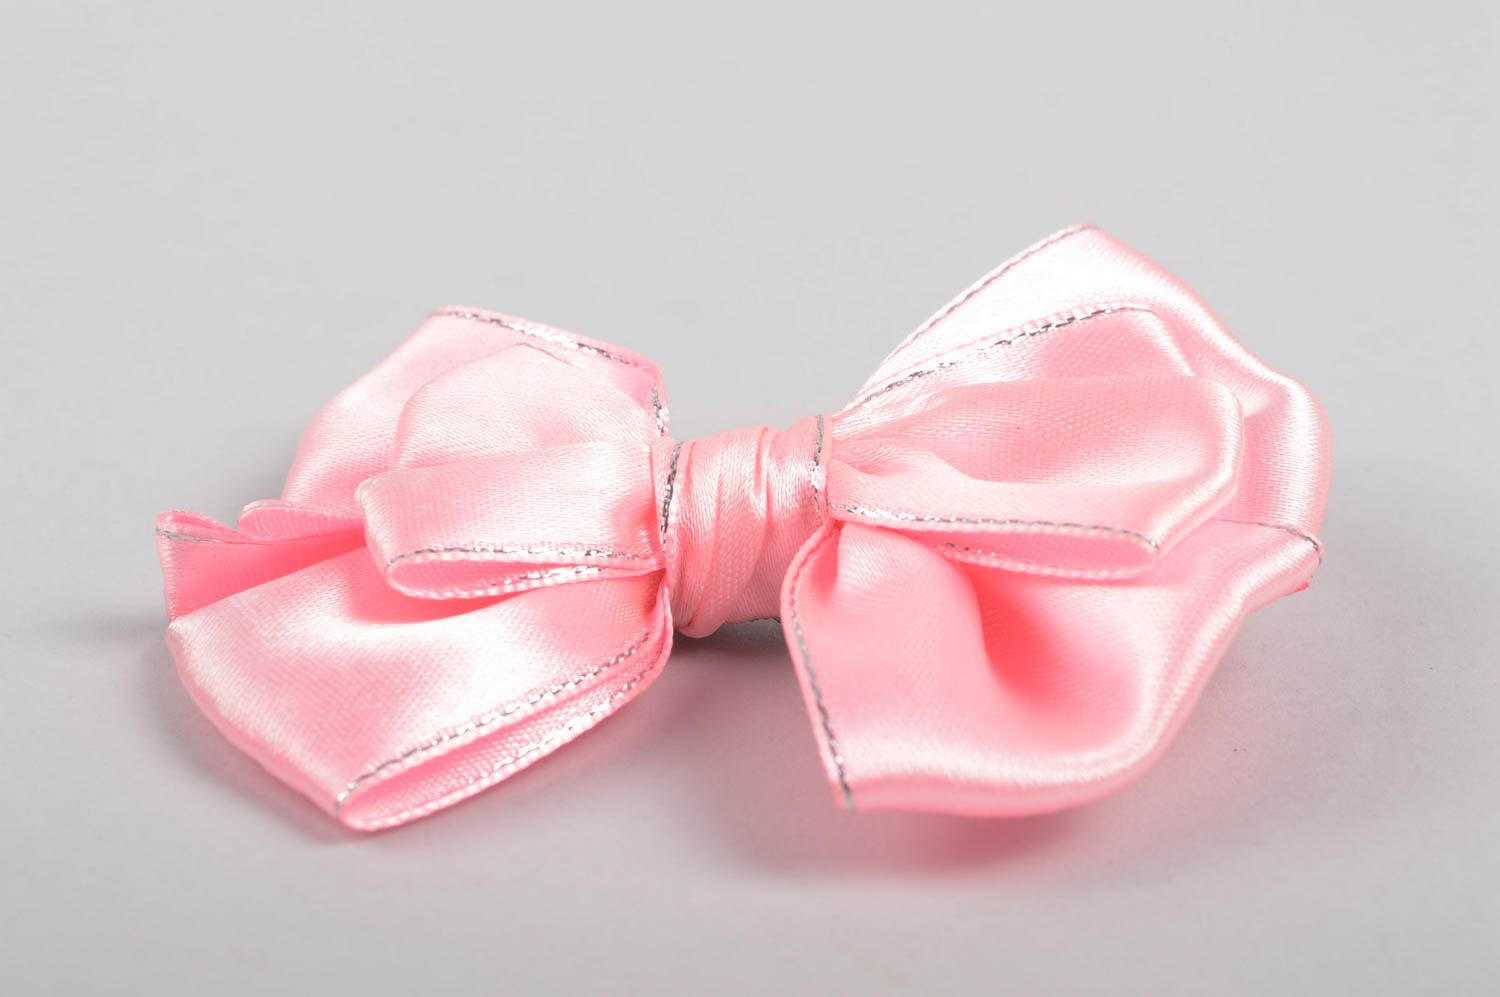 Handmade pink hair accessory hair bow made of ribbons hair bijouterie great gift photo 3